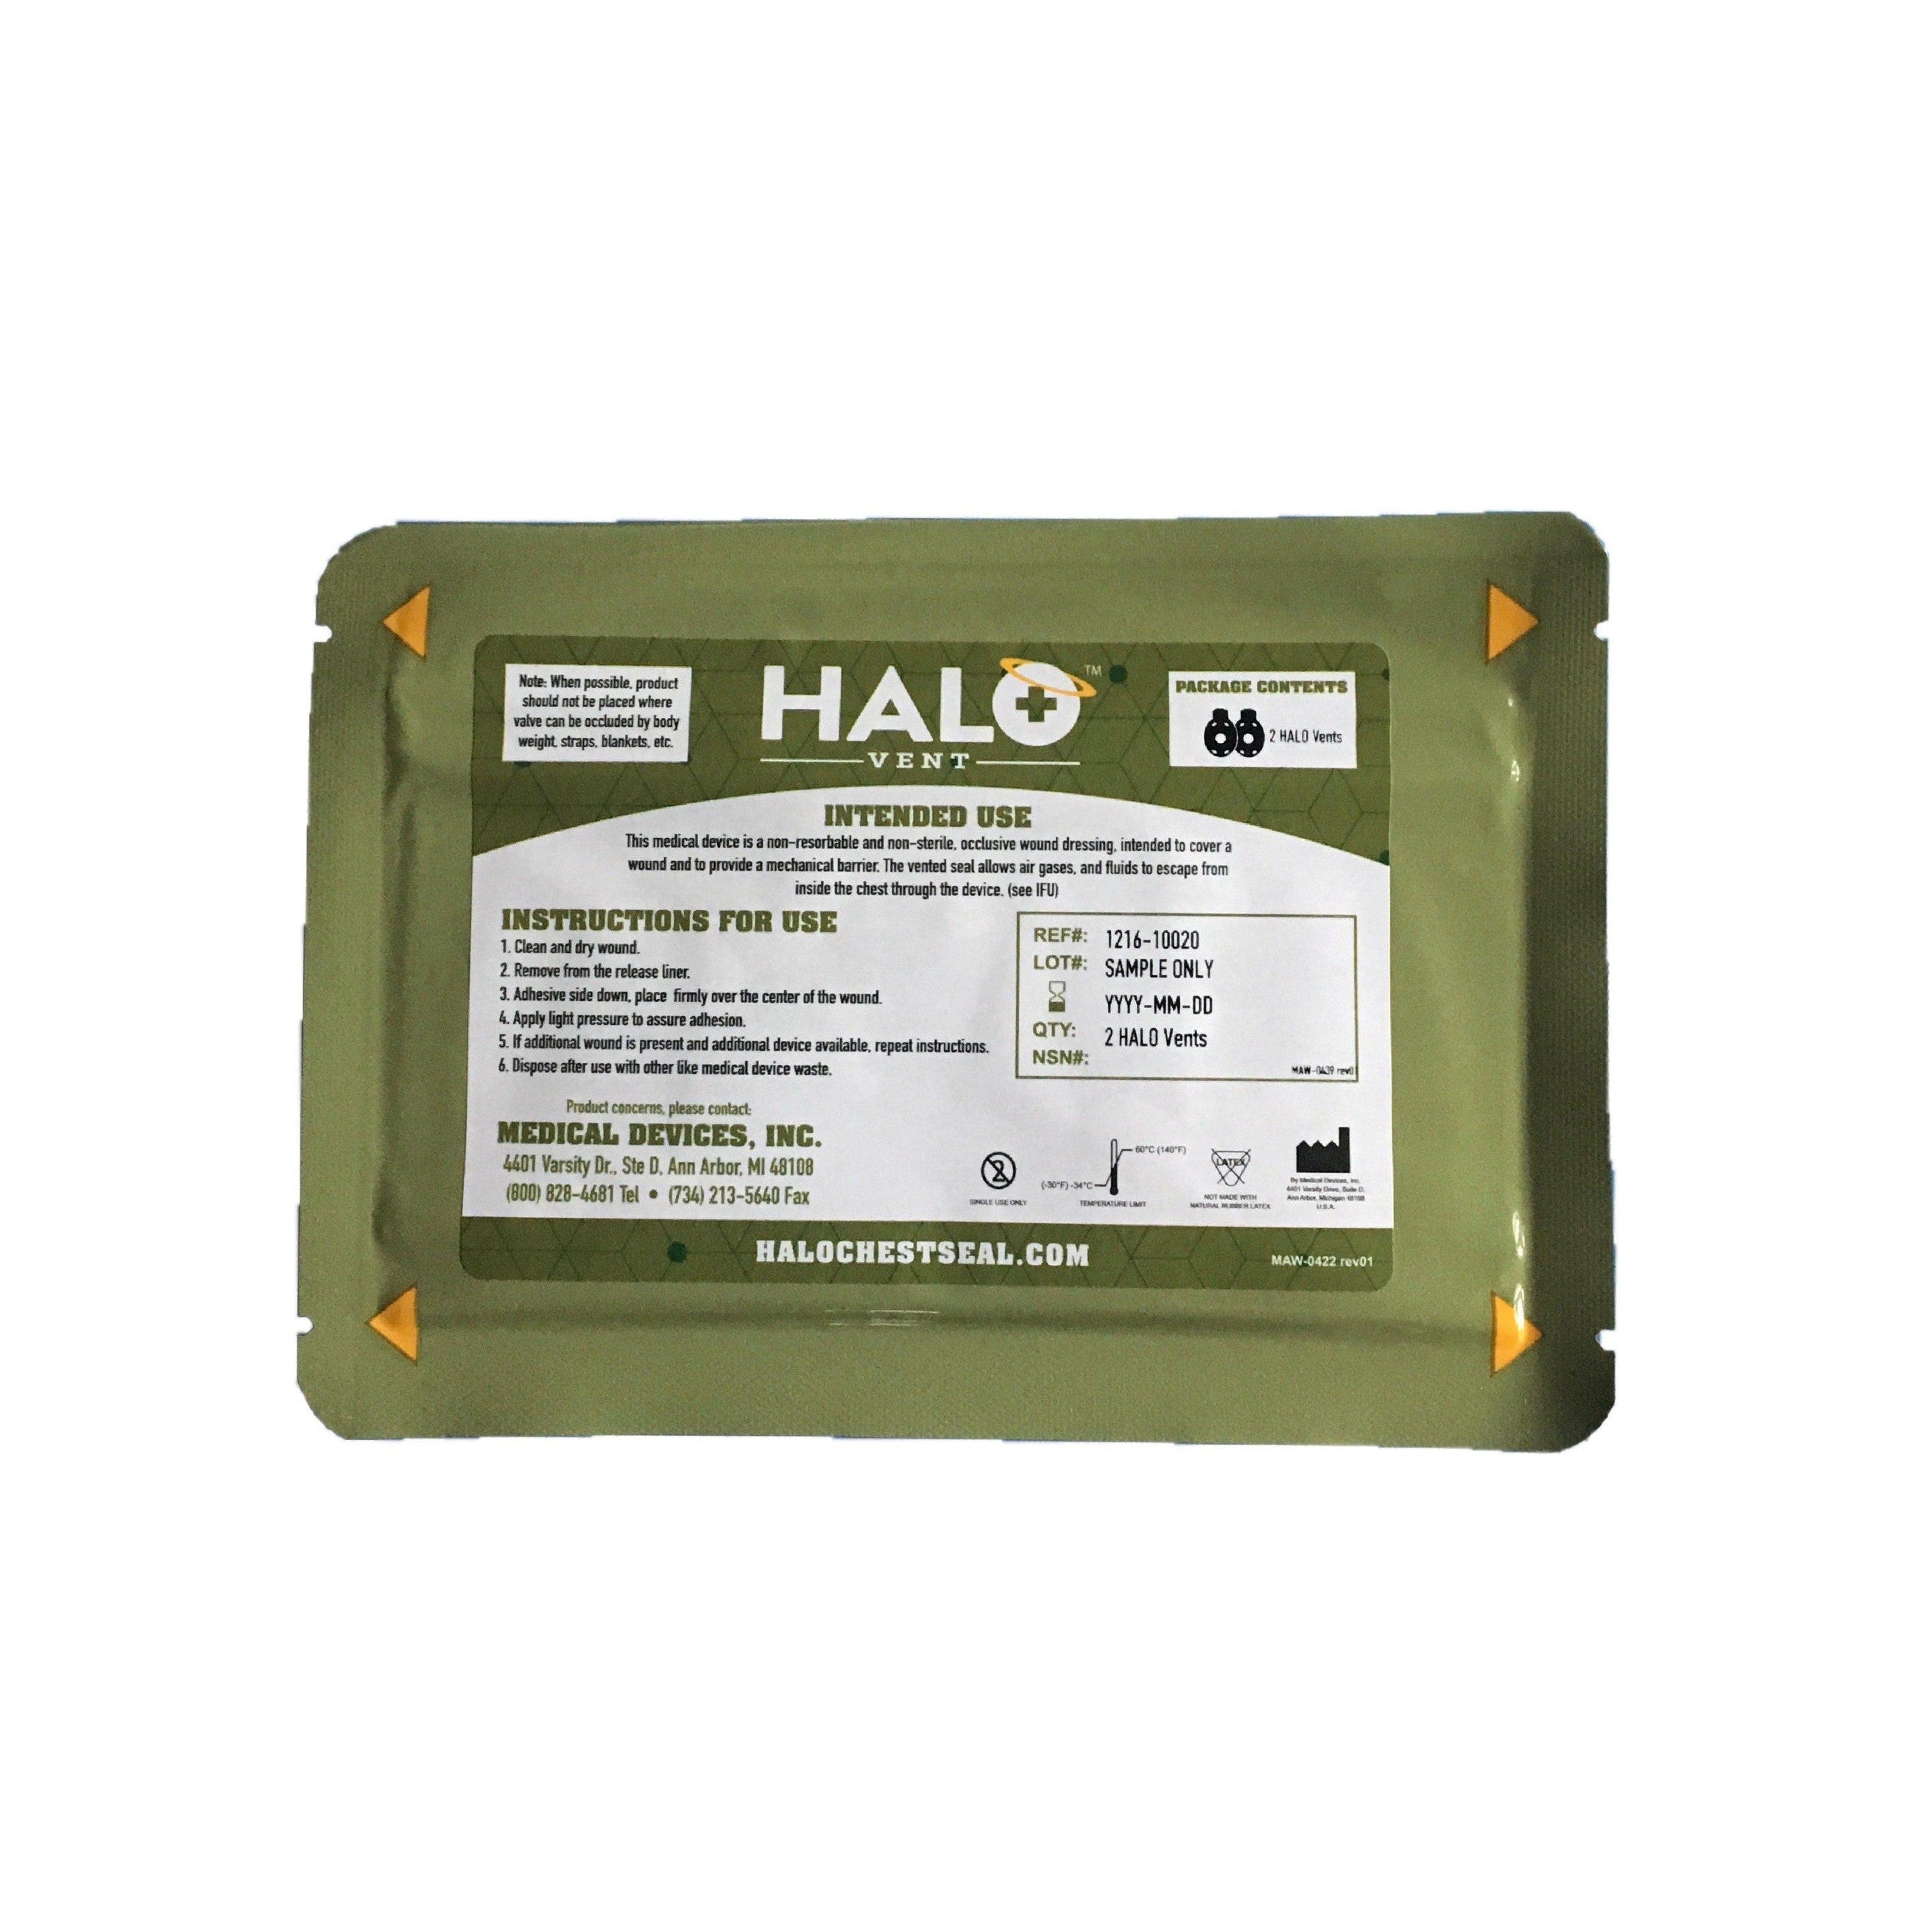 Halo Vent IFAK Two Pack, Package 7" x 5"